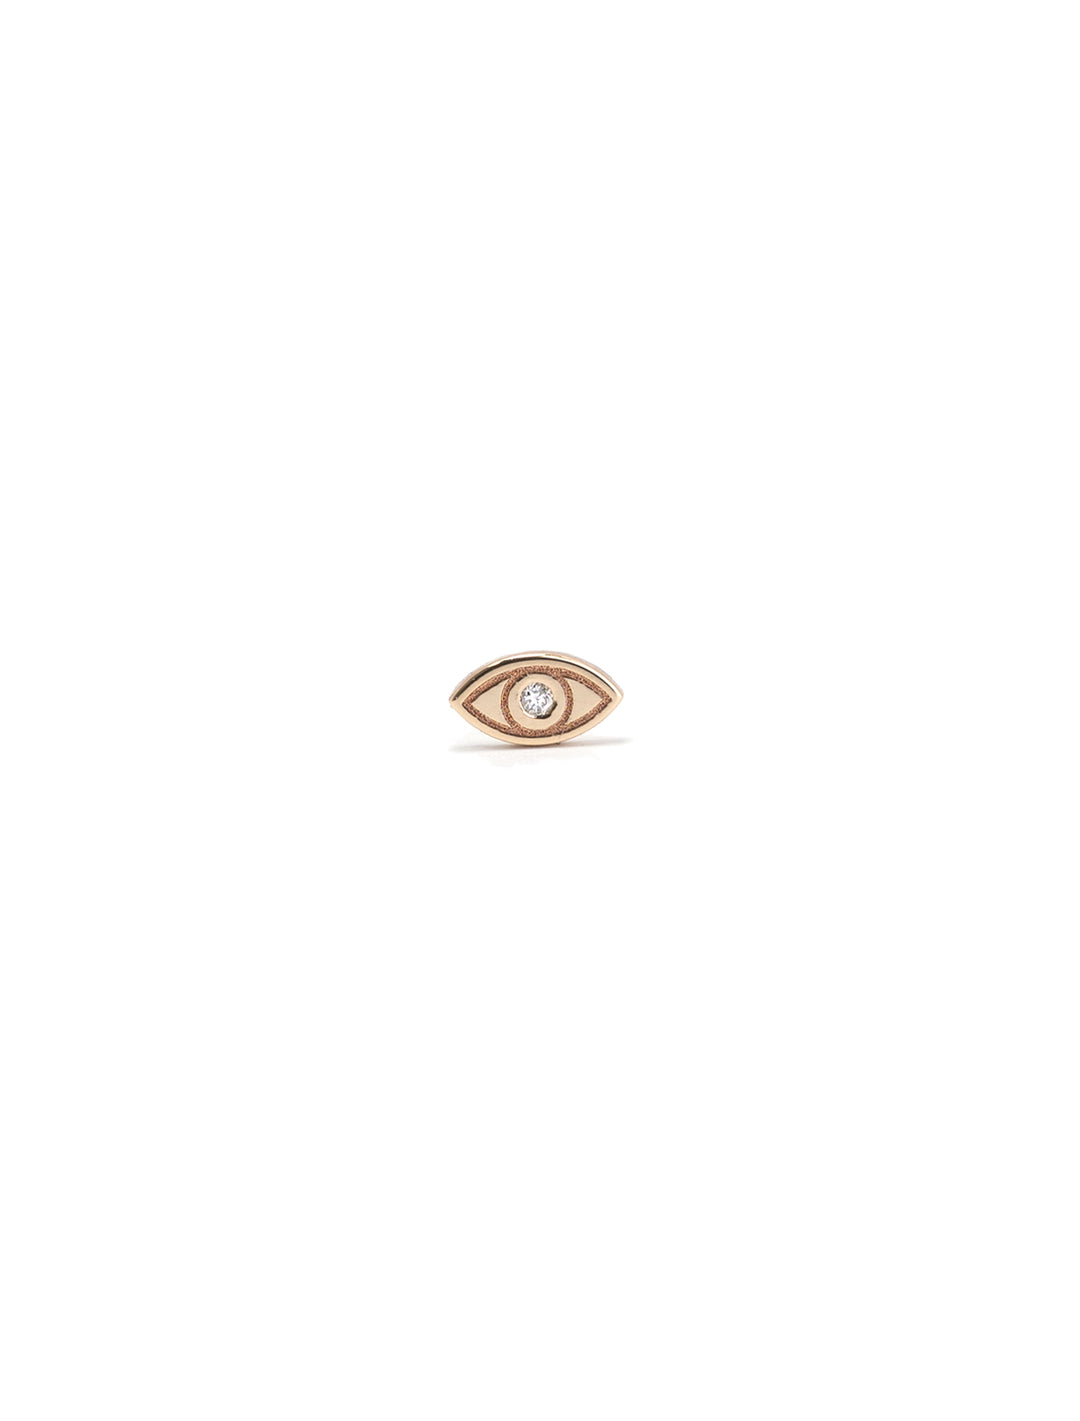 Front view of Zoe Chicco's 14k itty bitty evil eye stud - single.